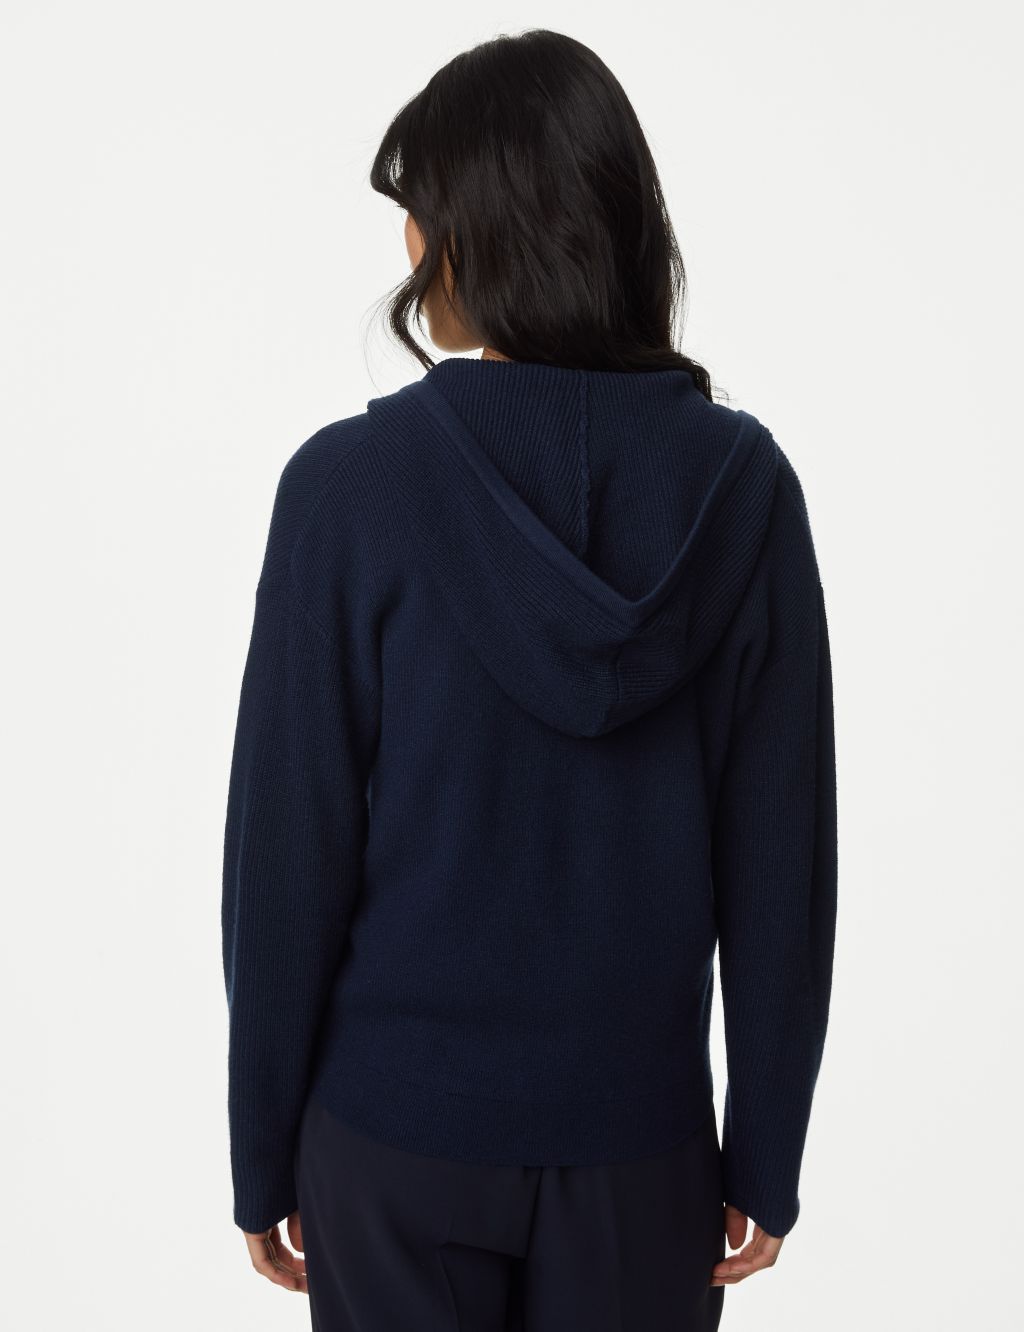 Soft Touch Zip Up Hoodie image 5